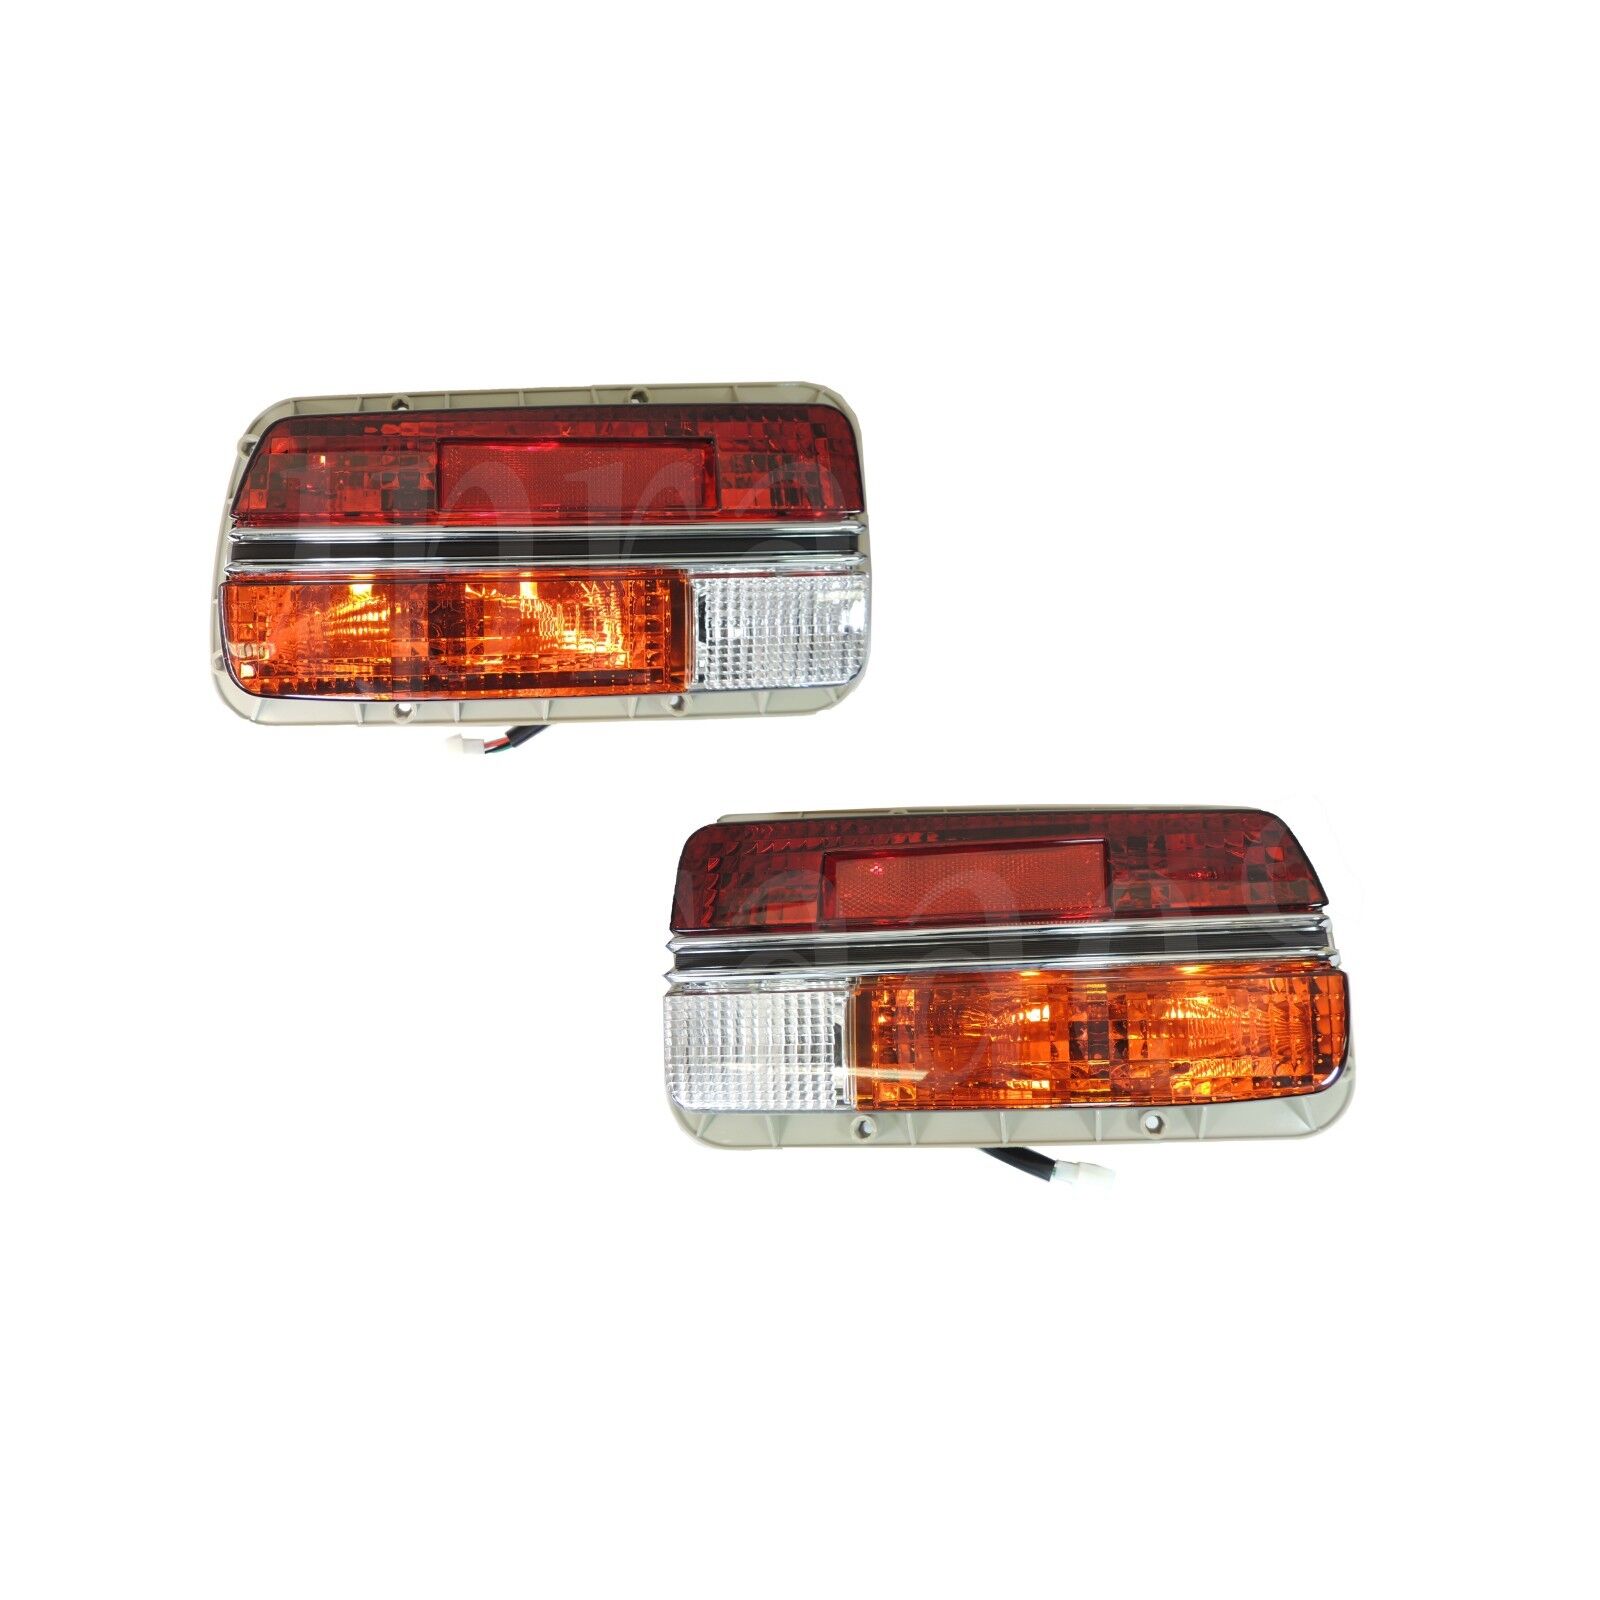 Set of Tail Lamp Assembly w/ Amber Signal Light For 1970-1973 70-73 Datsun 240z